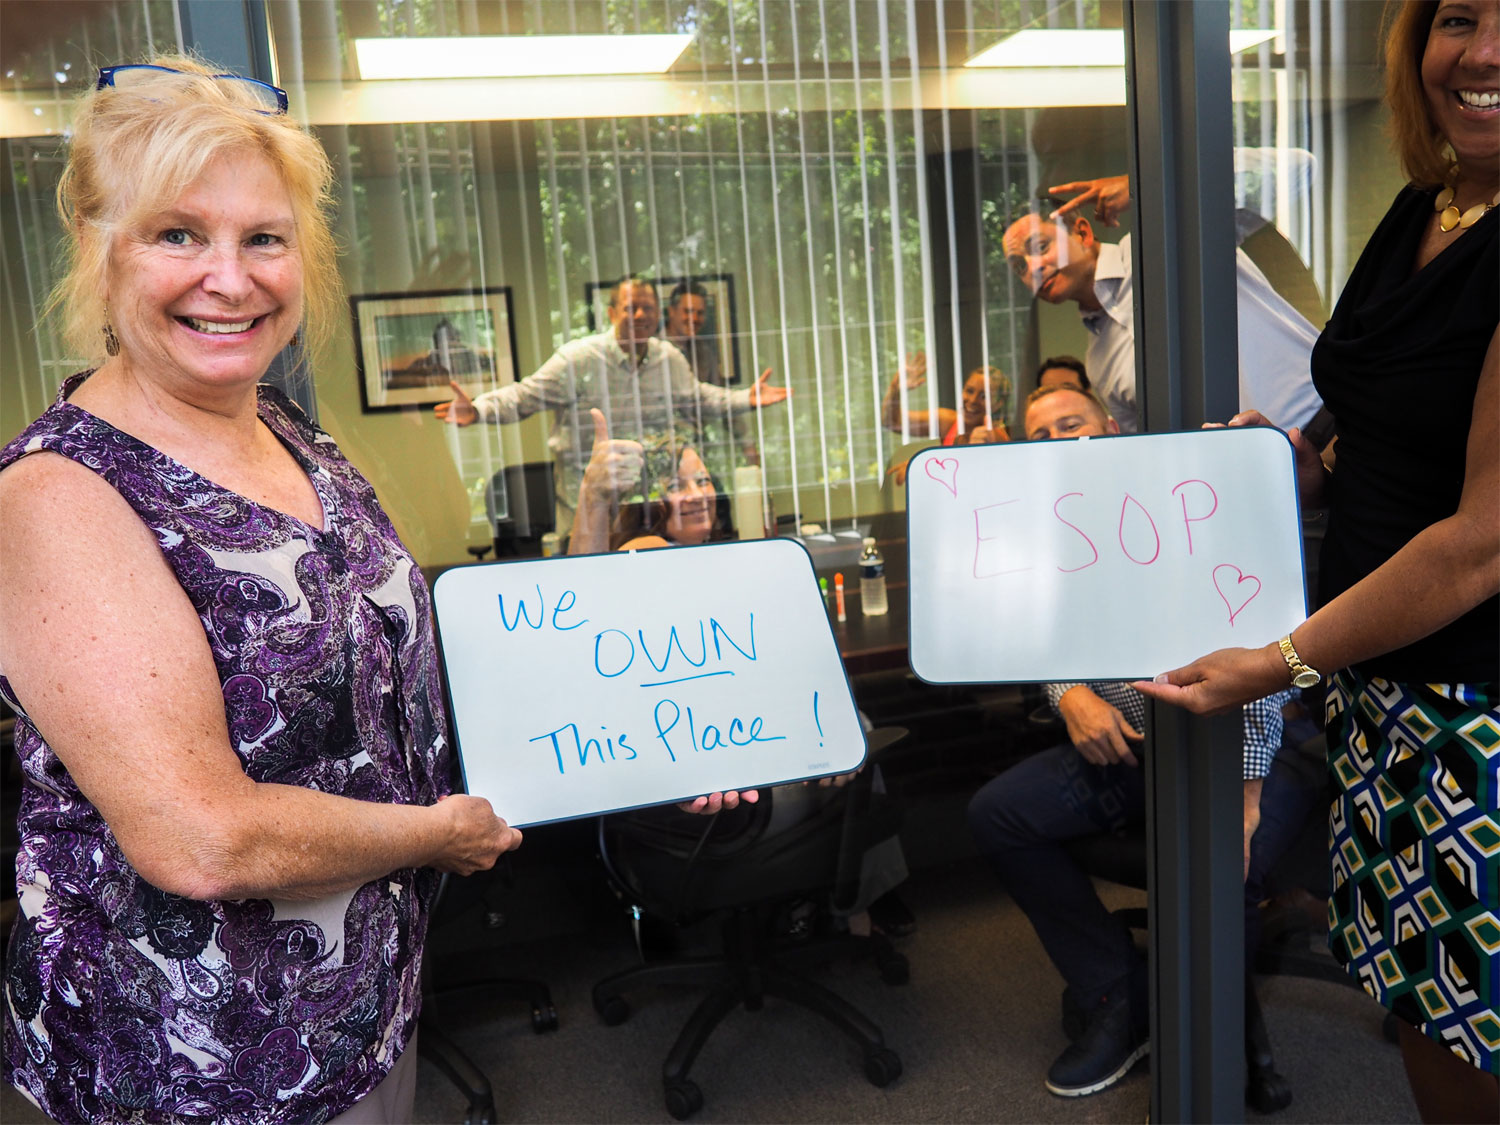 The team voted our 100% Employee Ownership as the main reason YOU should think about a career at Clark. Ann Morse, Senior Account Manager, said it best, "We own this place."